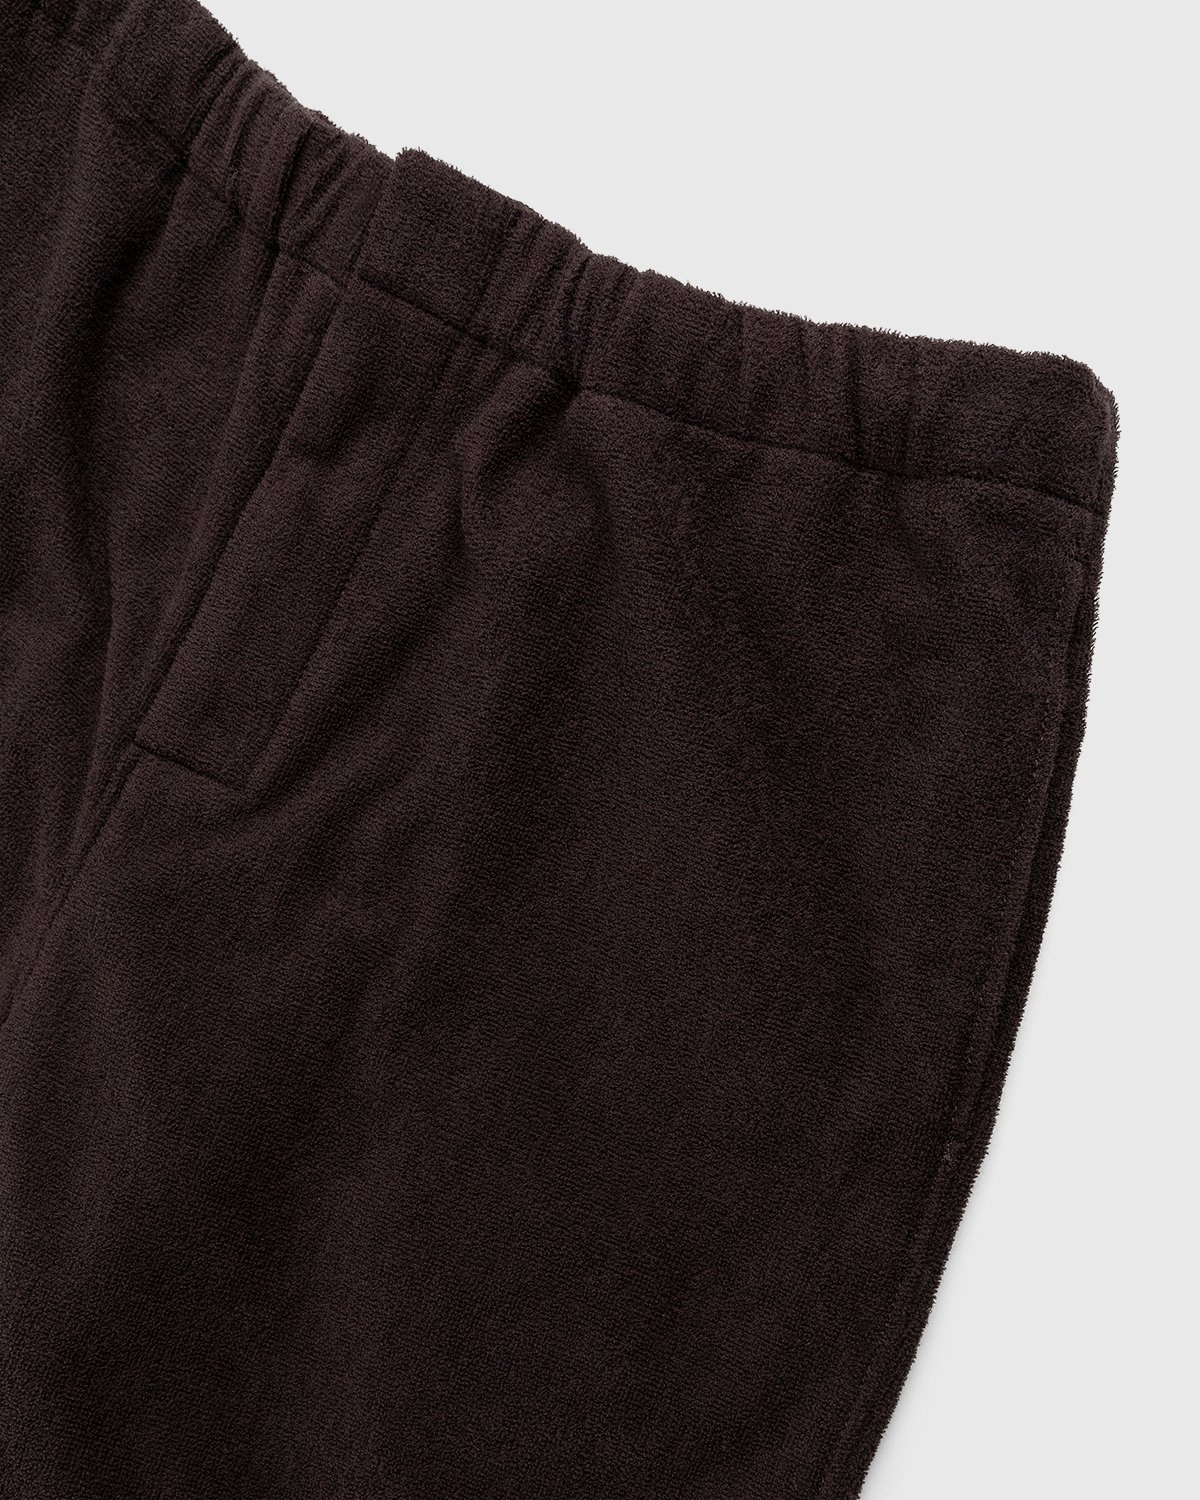 Auralee – Cotton Terry Cloth Shorts Brown - Shorts - Brown - Image 3